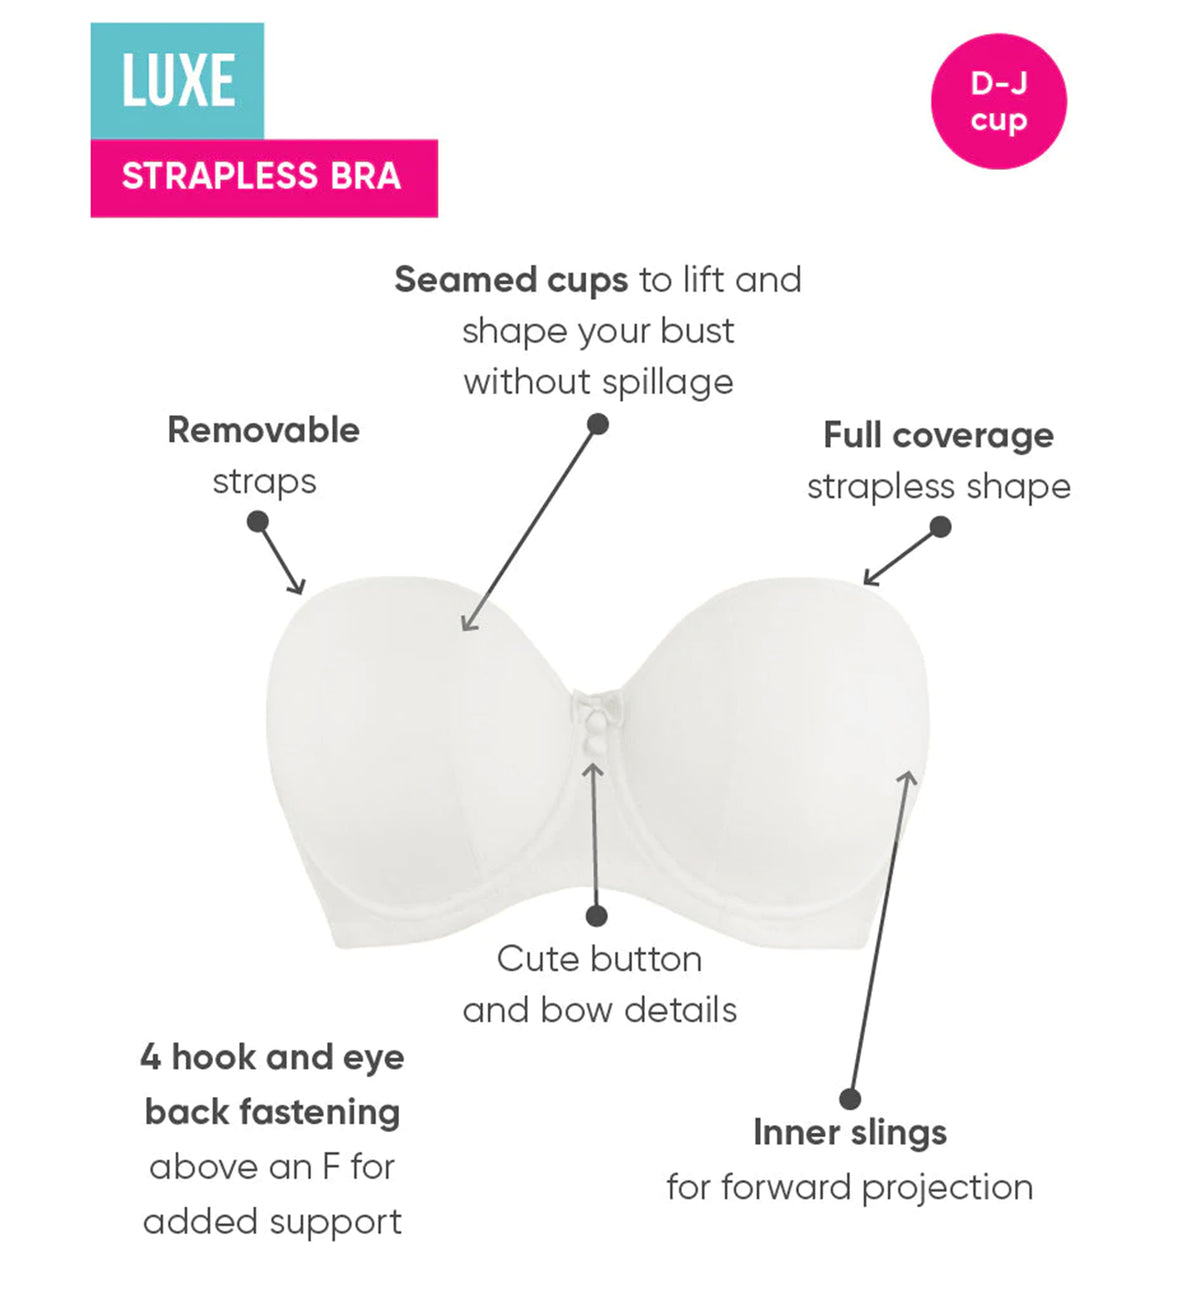 Curvy Kate Luxe Multiway Strapless Underwire Bra (CK2601),28J,Pearl Ivory - Pearl Ivory,28J